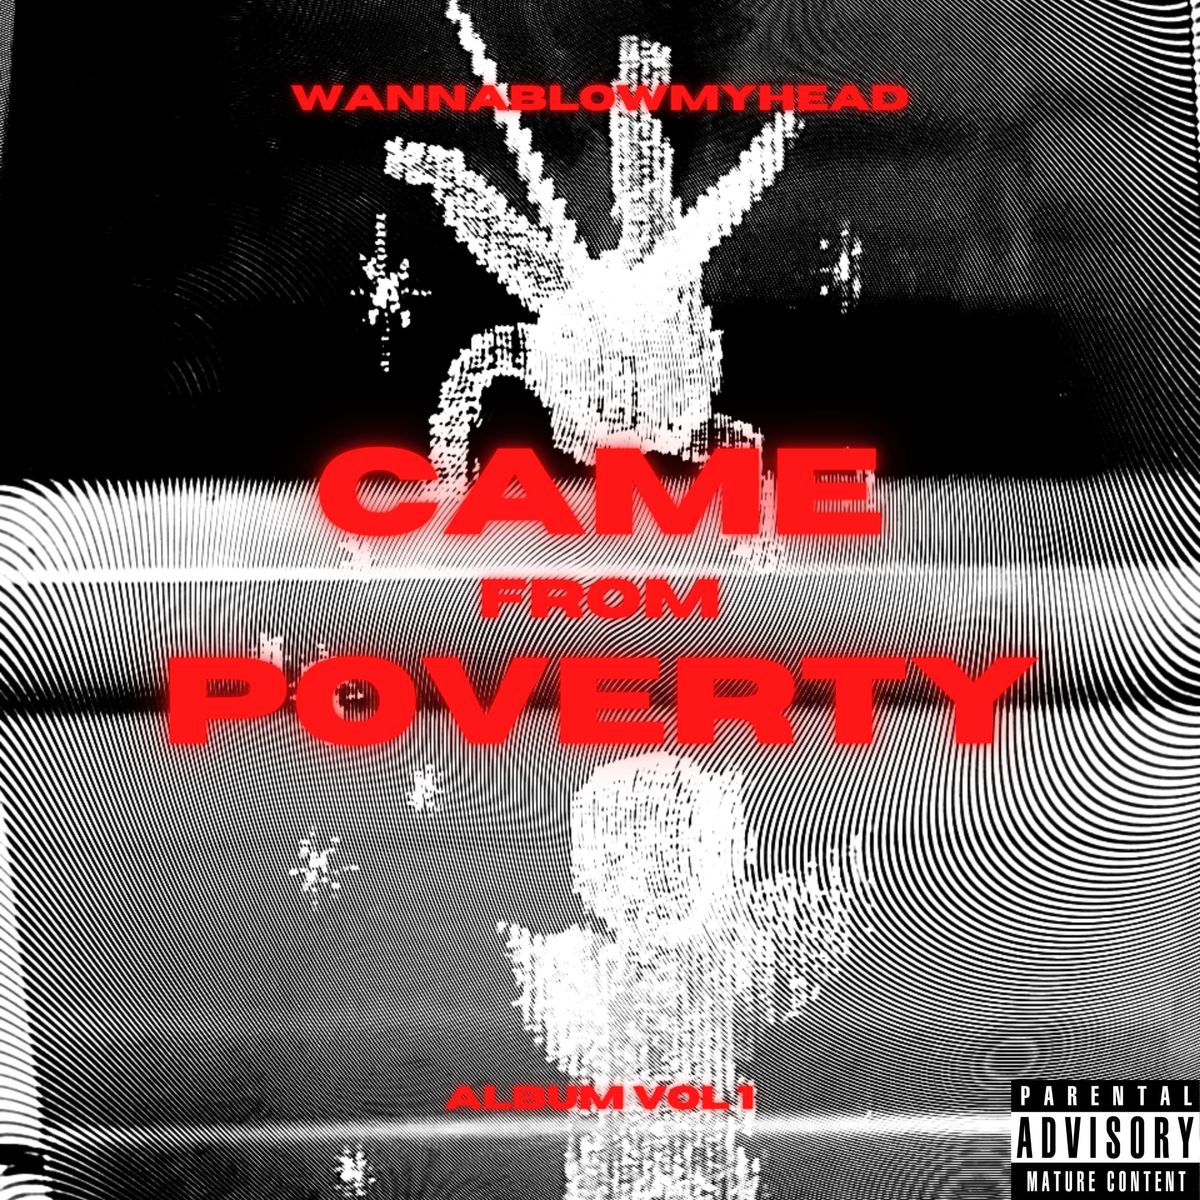 WANNABLOWMYHEAD – Came from poverty – EP